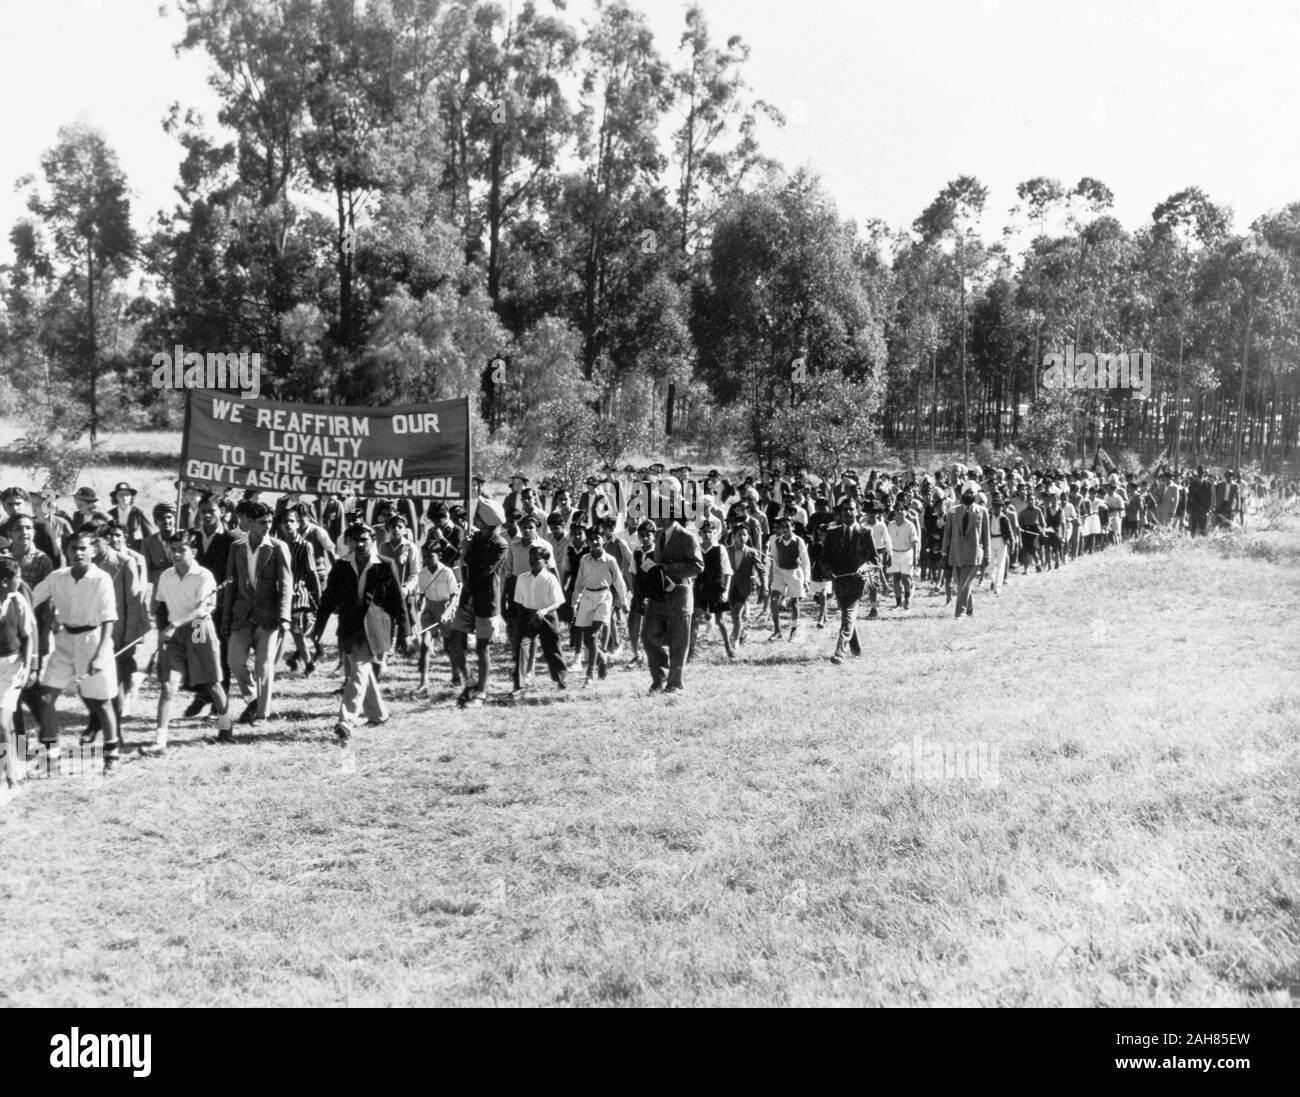 Kenya, A group of Asian teenagers, dressed in school uniform, are escorted by adults as they march through a field with trees in the background. Many of the congregation are carrying Union Jack flags. They are carrying a banner which reads 'We Reaffirm Our Loyalty to the Crown Govt. Asian High School.'', February 1952. 2001/090/1/4/1/27. Stock Photo